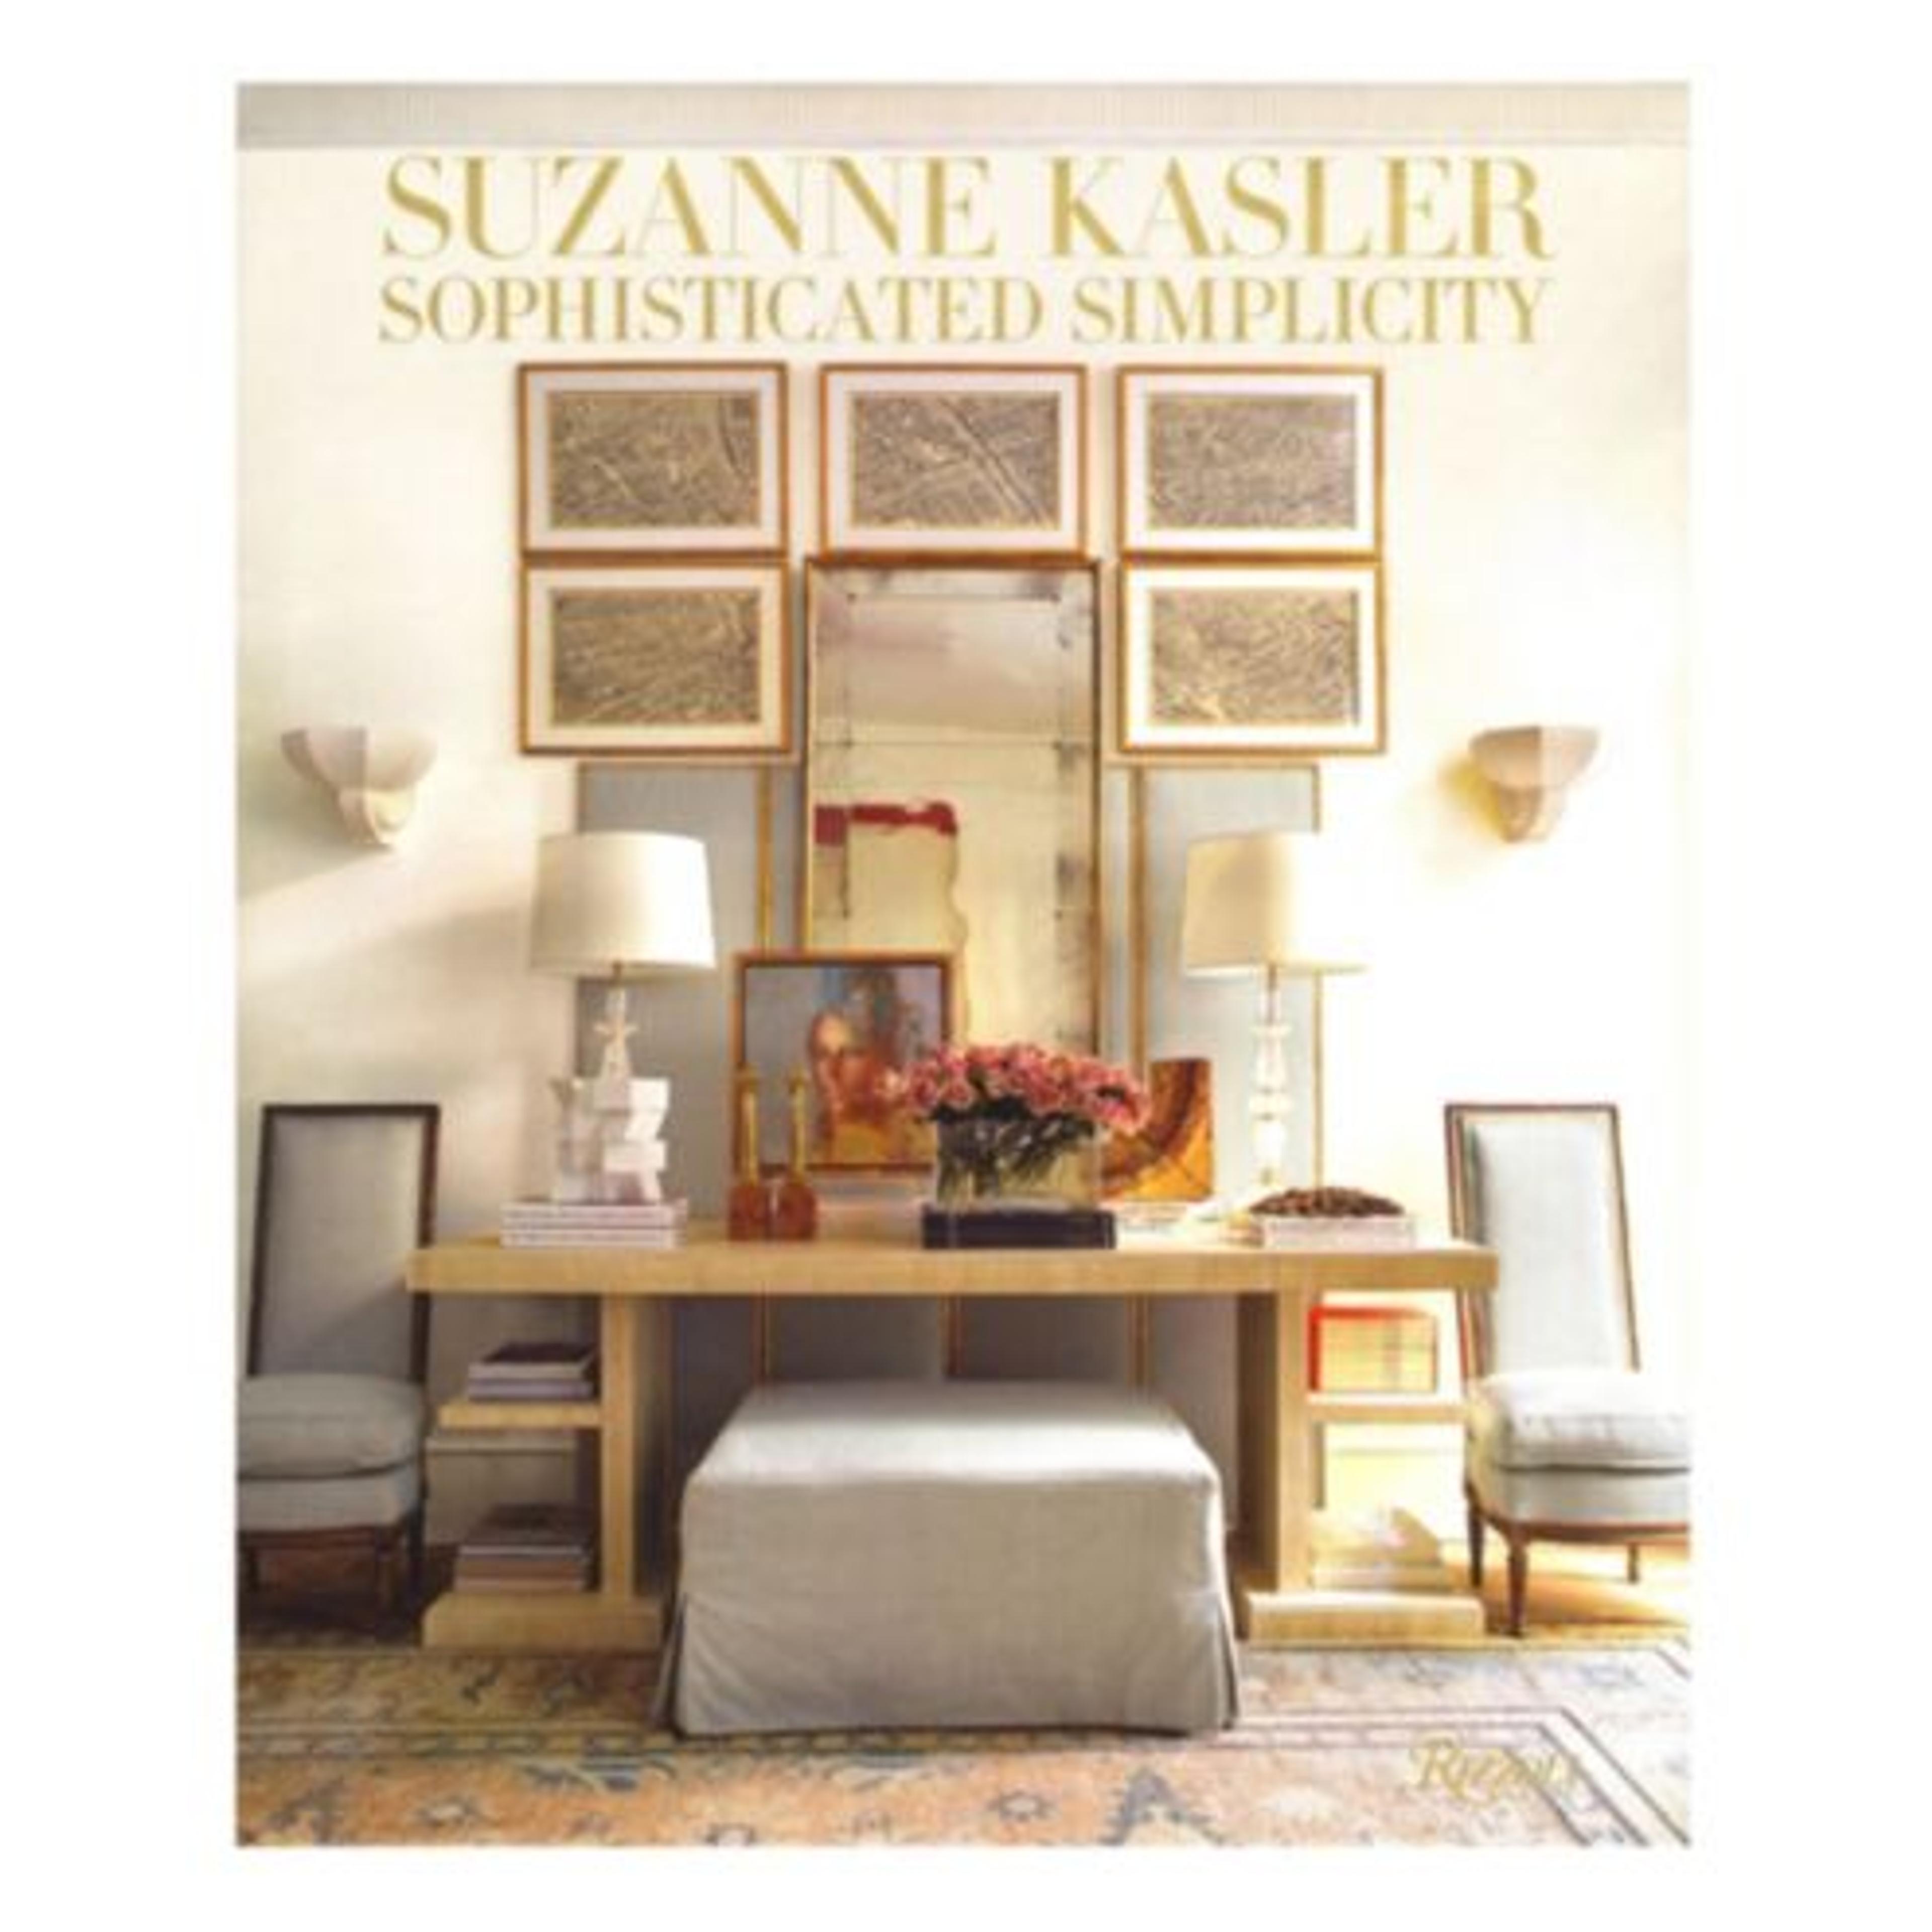 Suzanne Kasler Book Sophisticated Simplicity